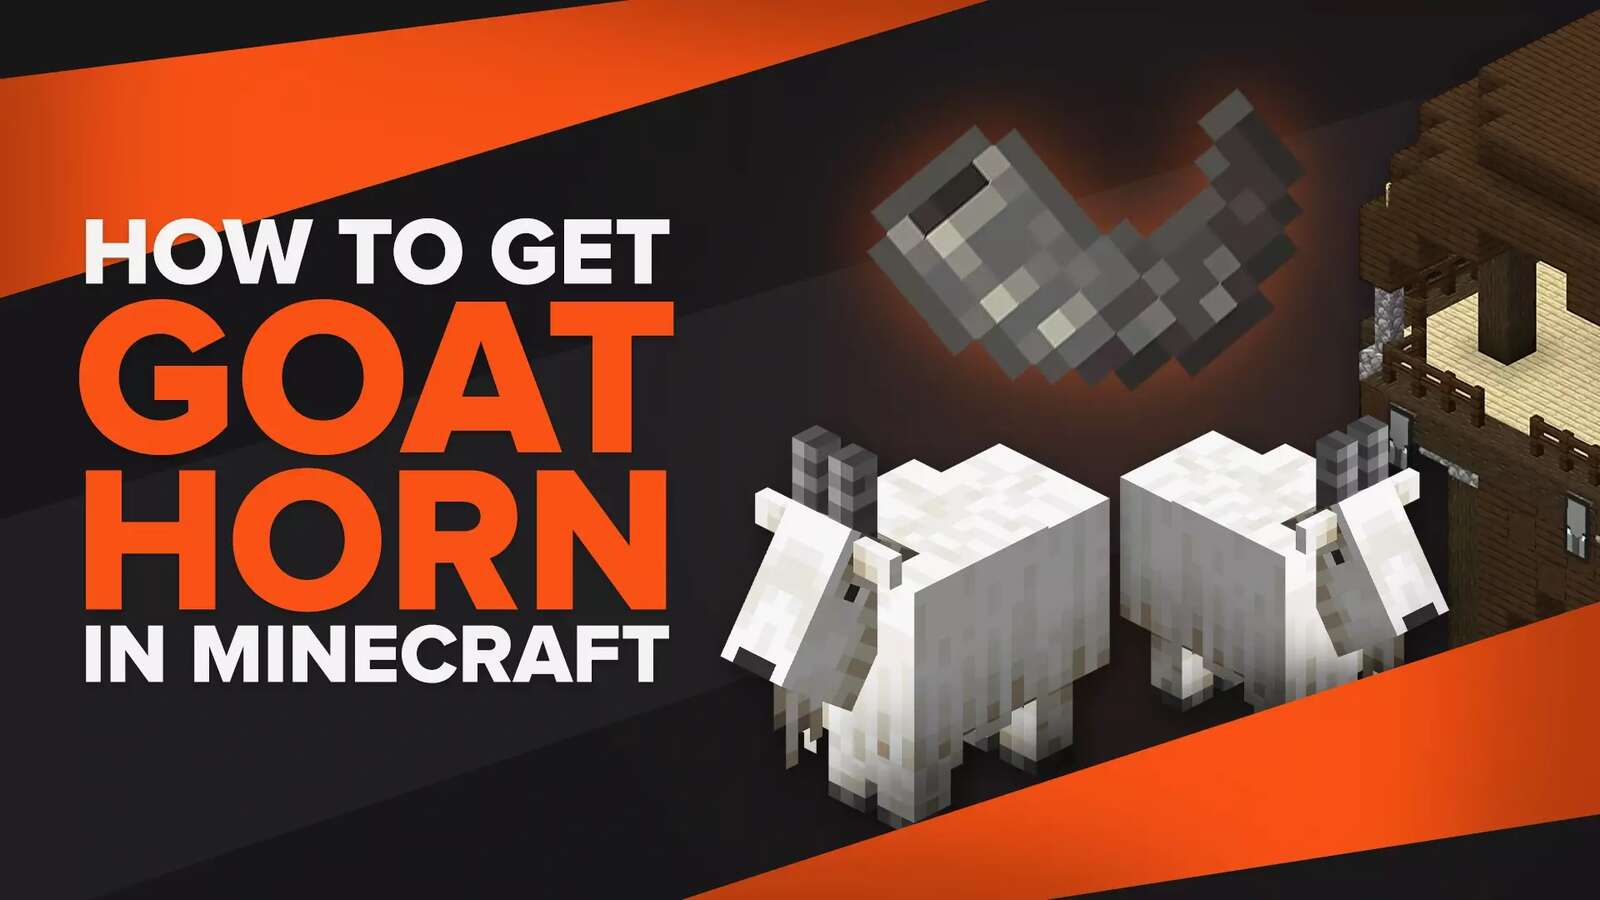 How To Get a Goat Horn in Minecraft [With Exact Locations]